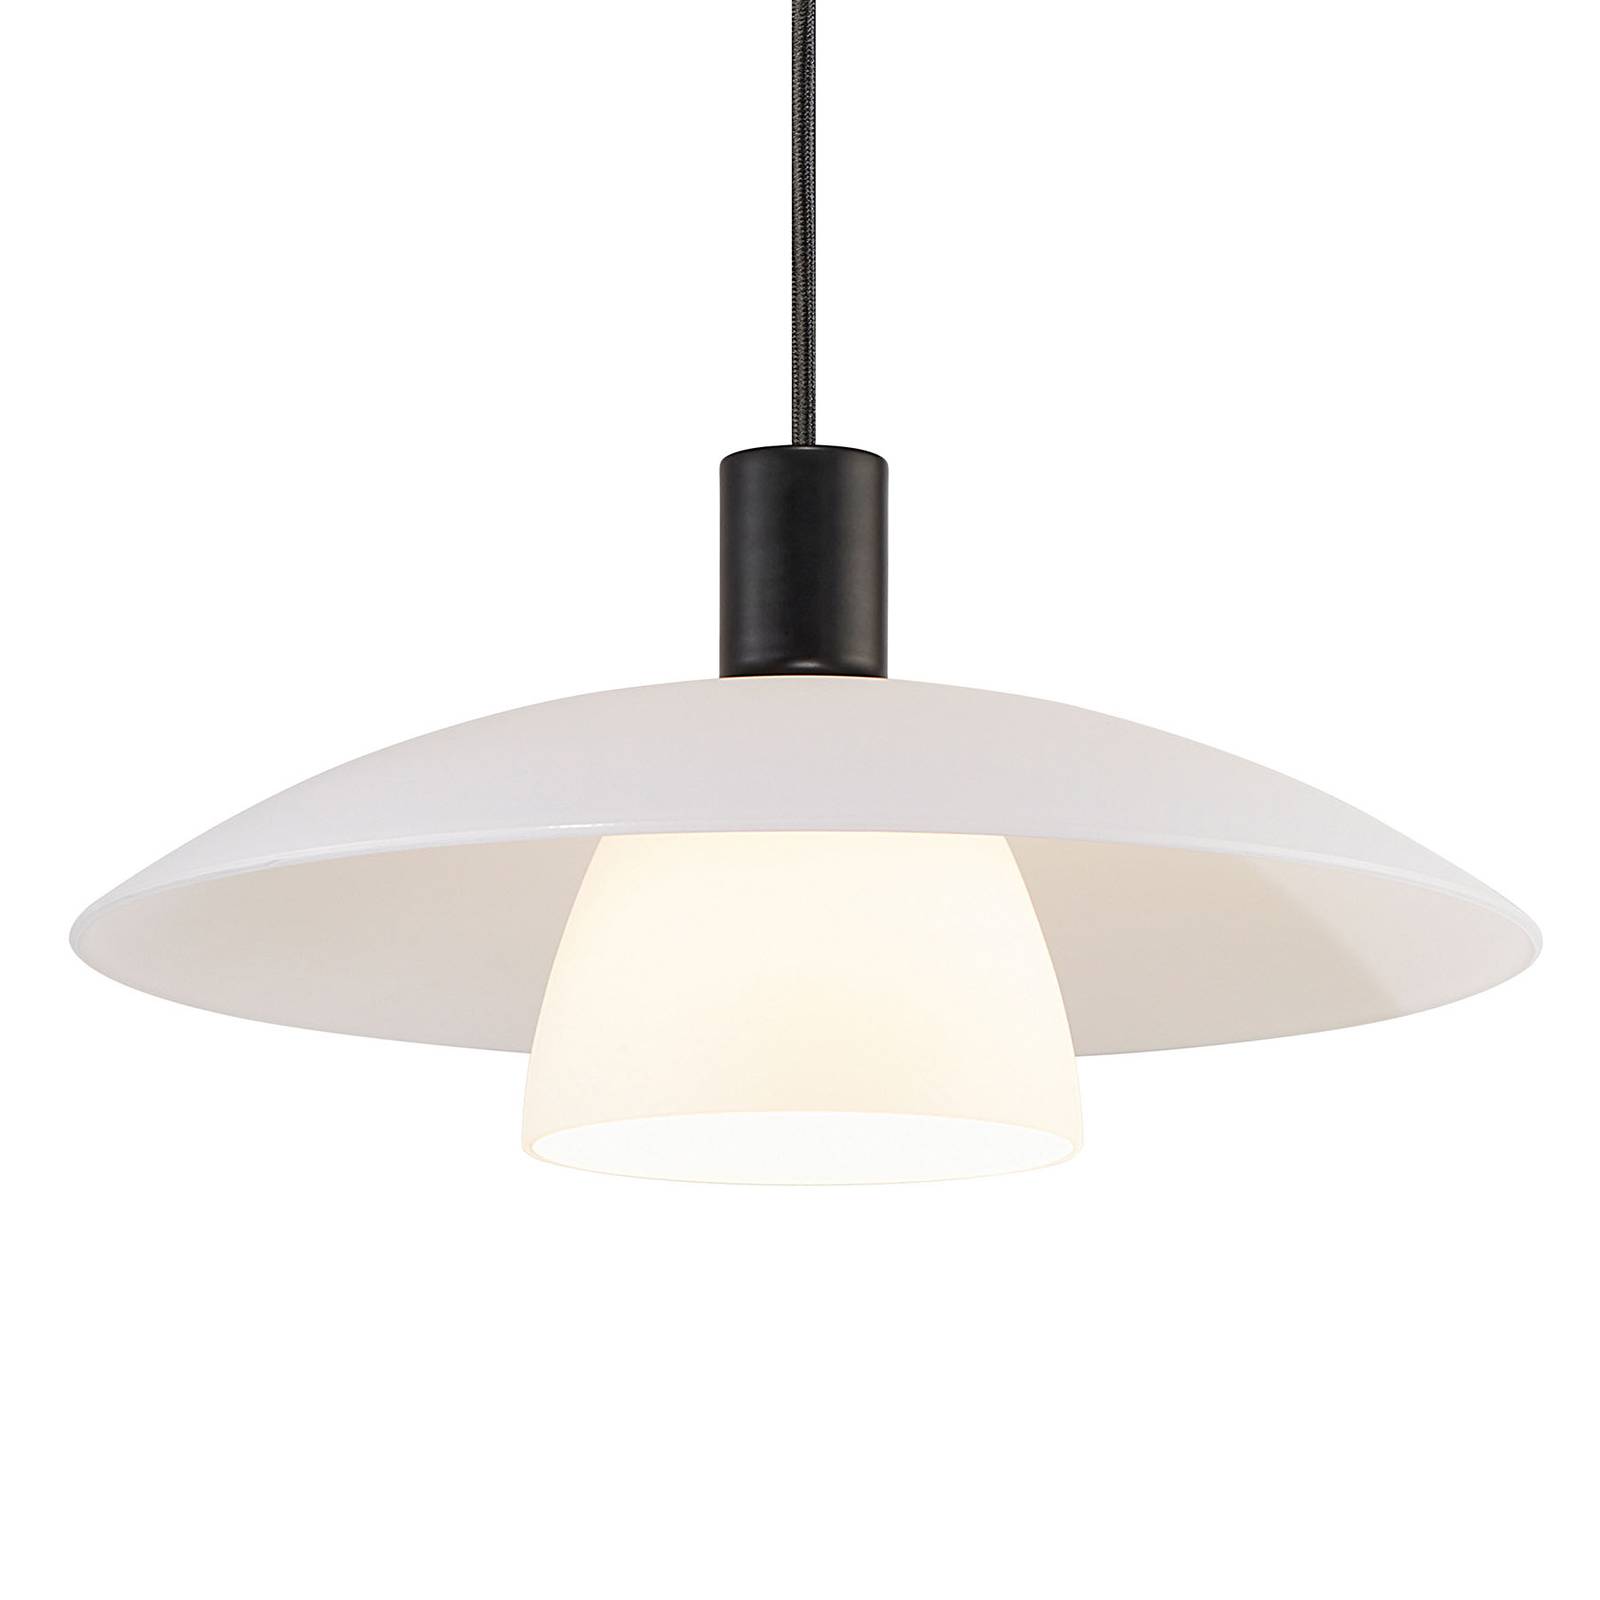 Verona hanging light in white and black